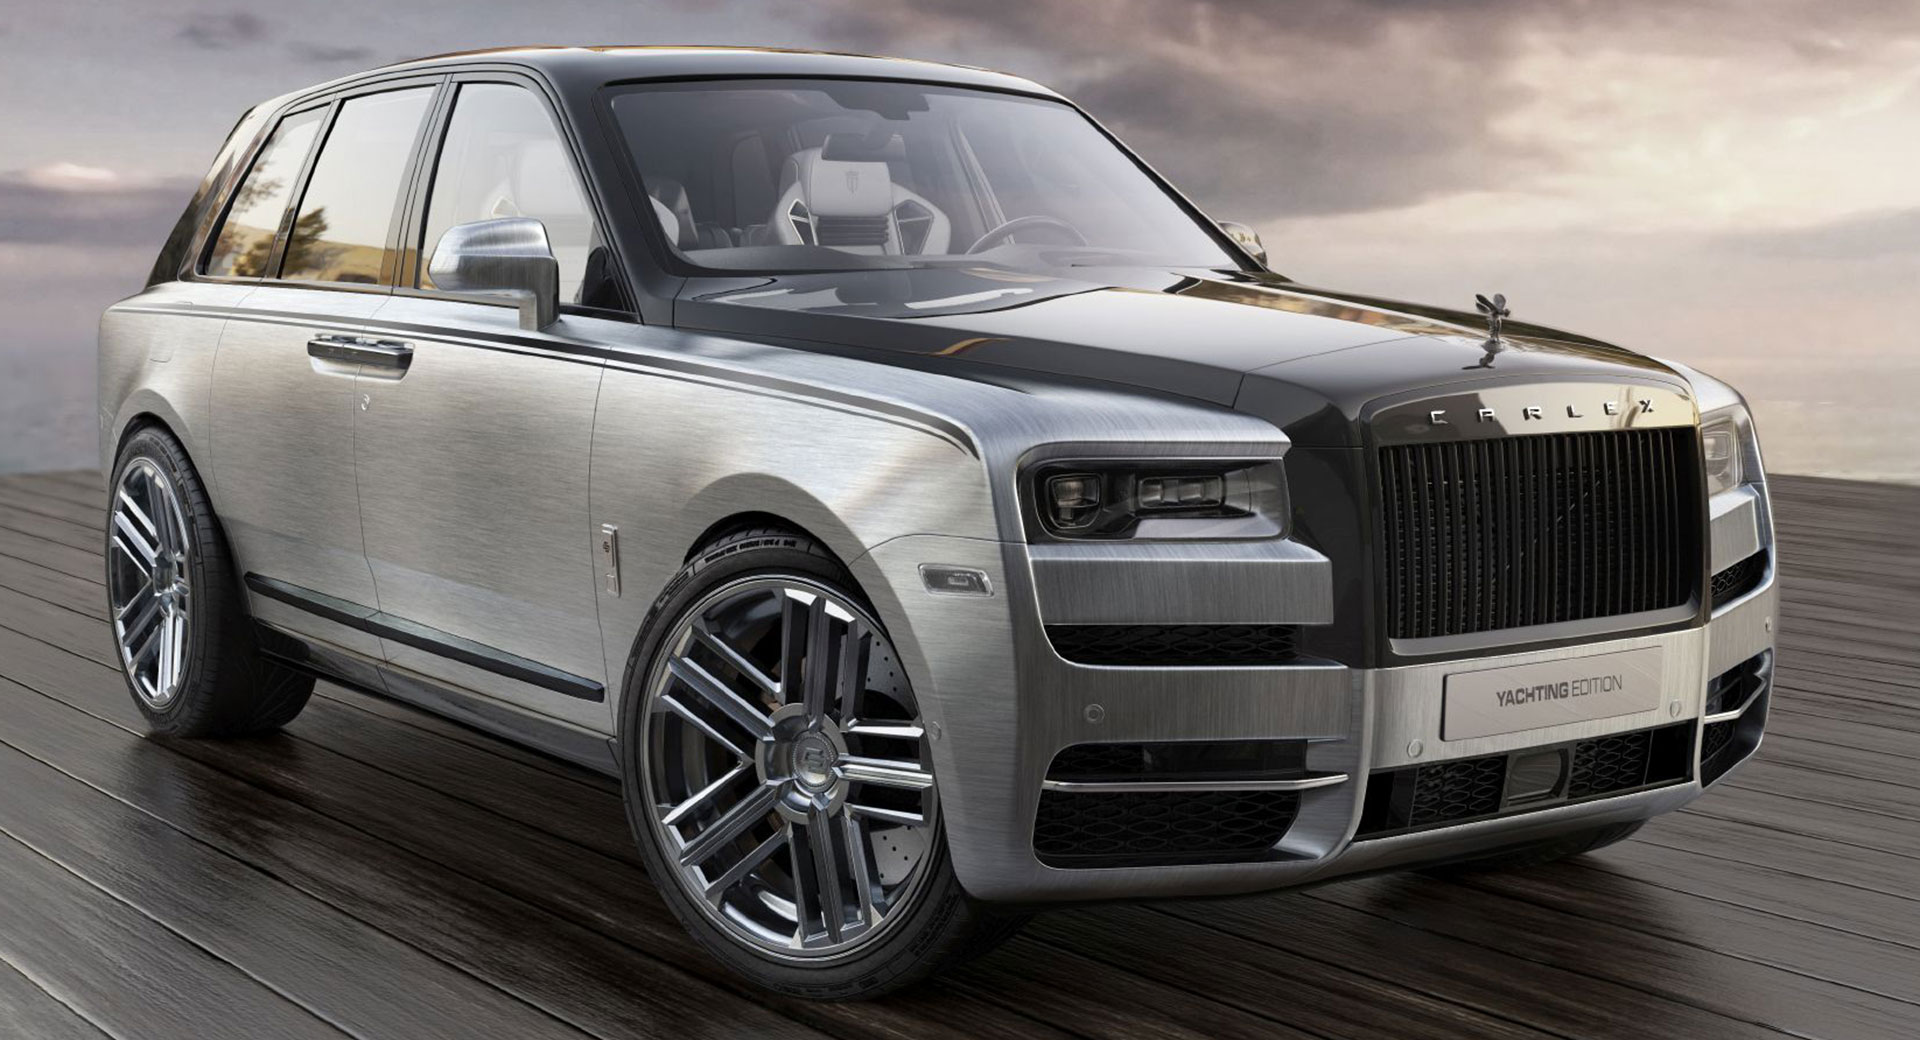 Carlex Design Goes Yachting With Its New RollsRoyce Cullinan Carscoops